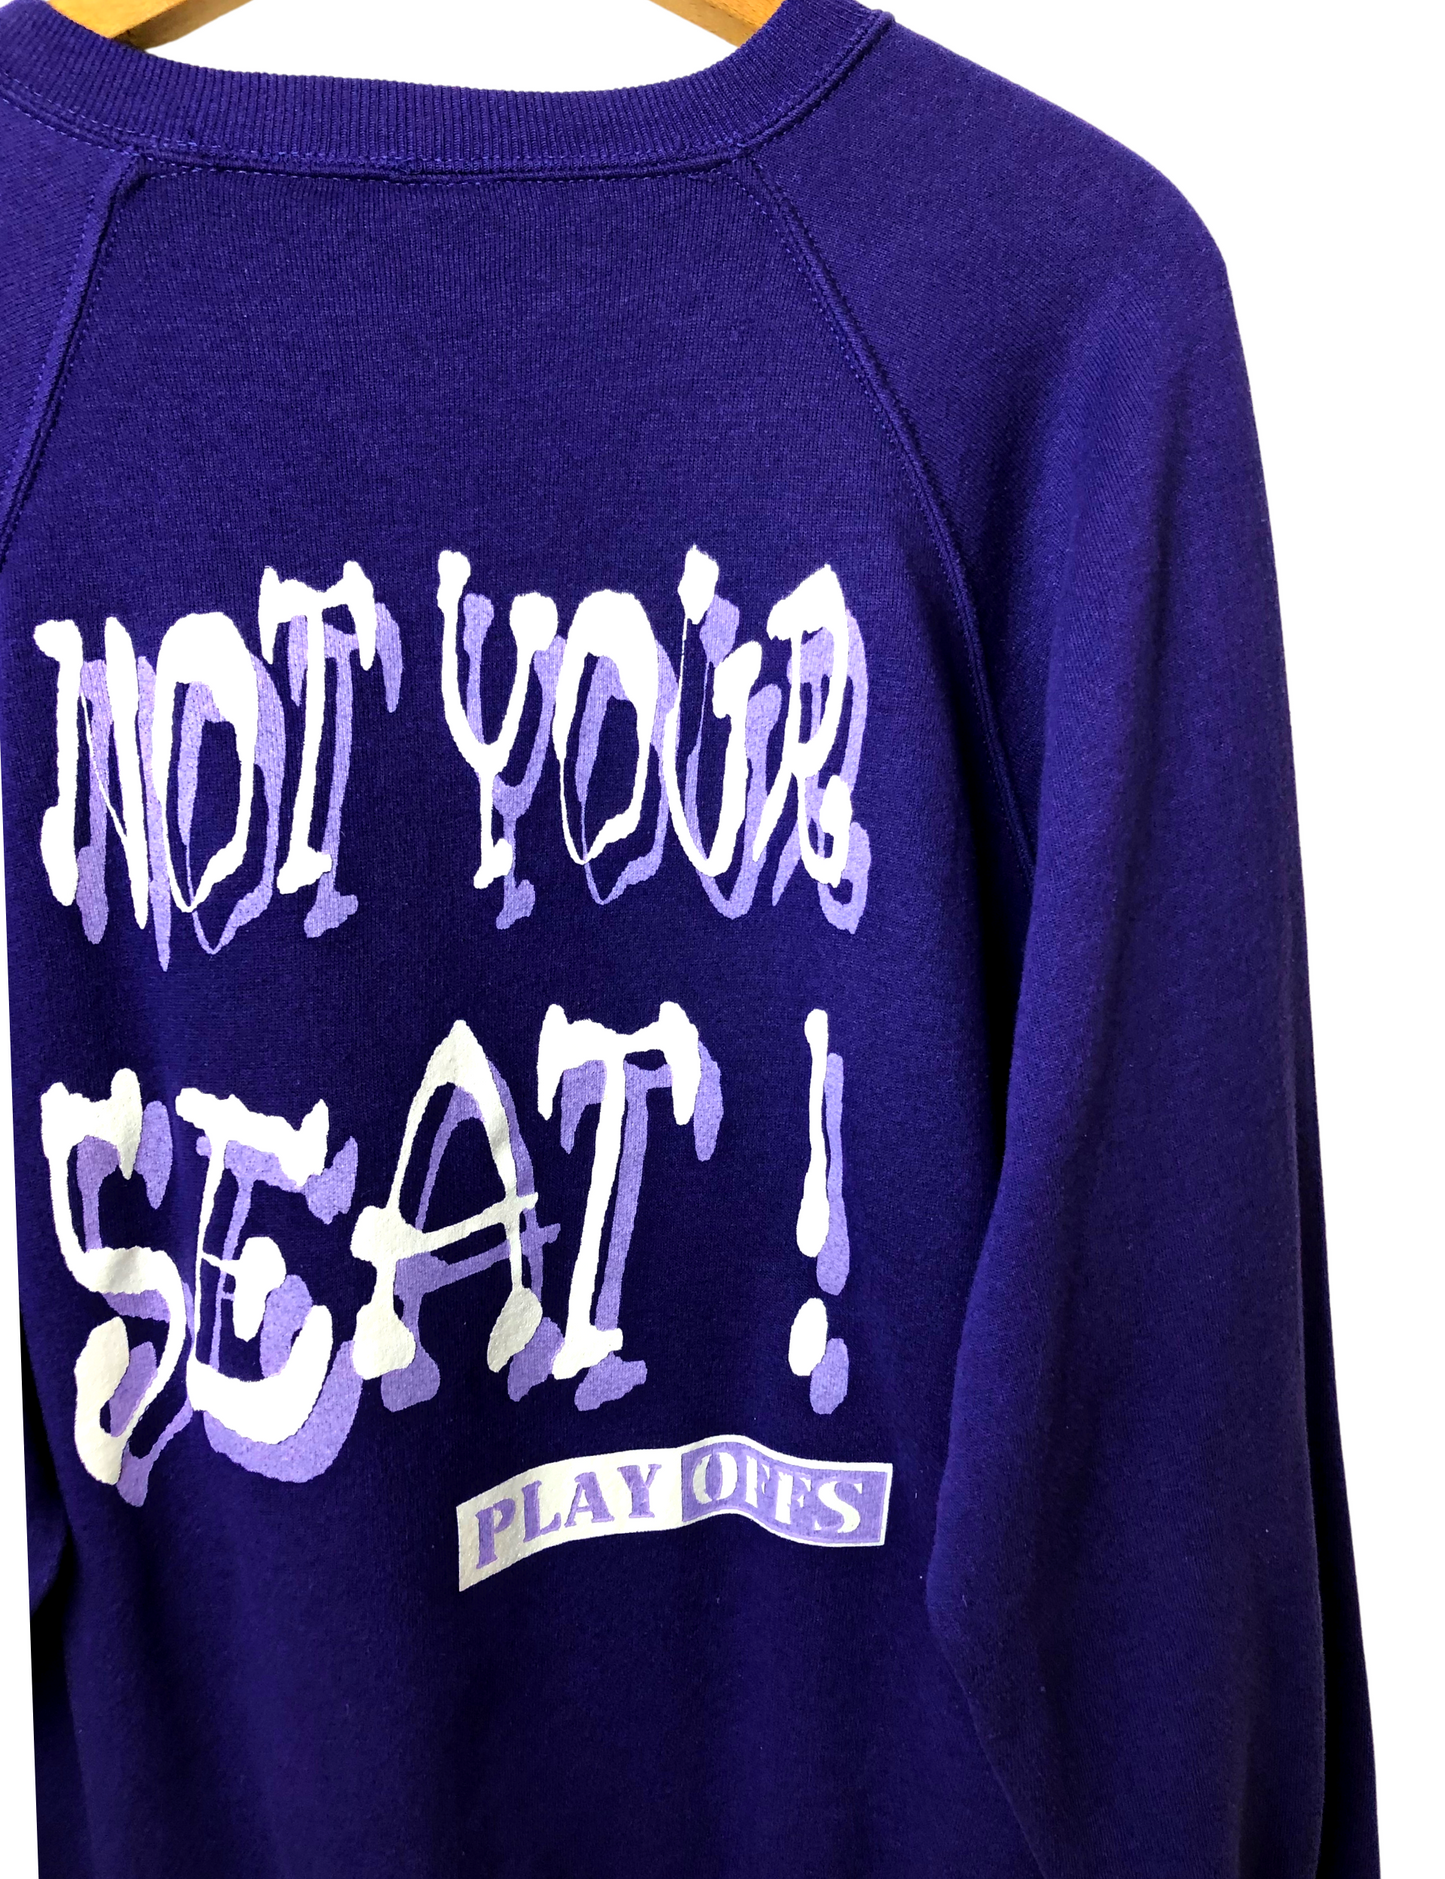 Vintage 90’s Rollerblading “Hit the Street, Not Your Seat” Playoffs Jerzees Sweatshirt